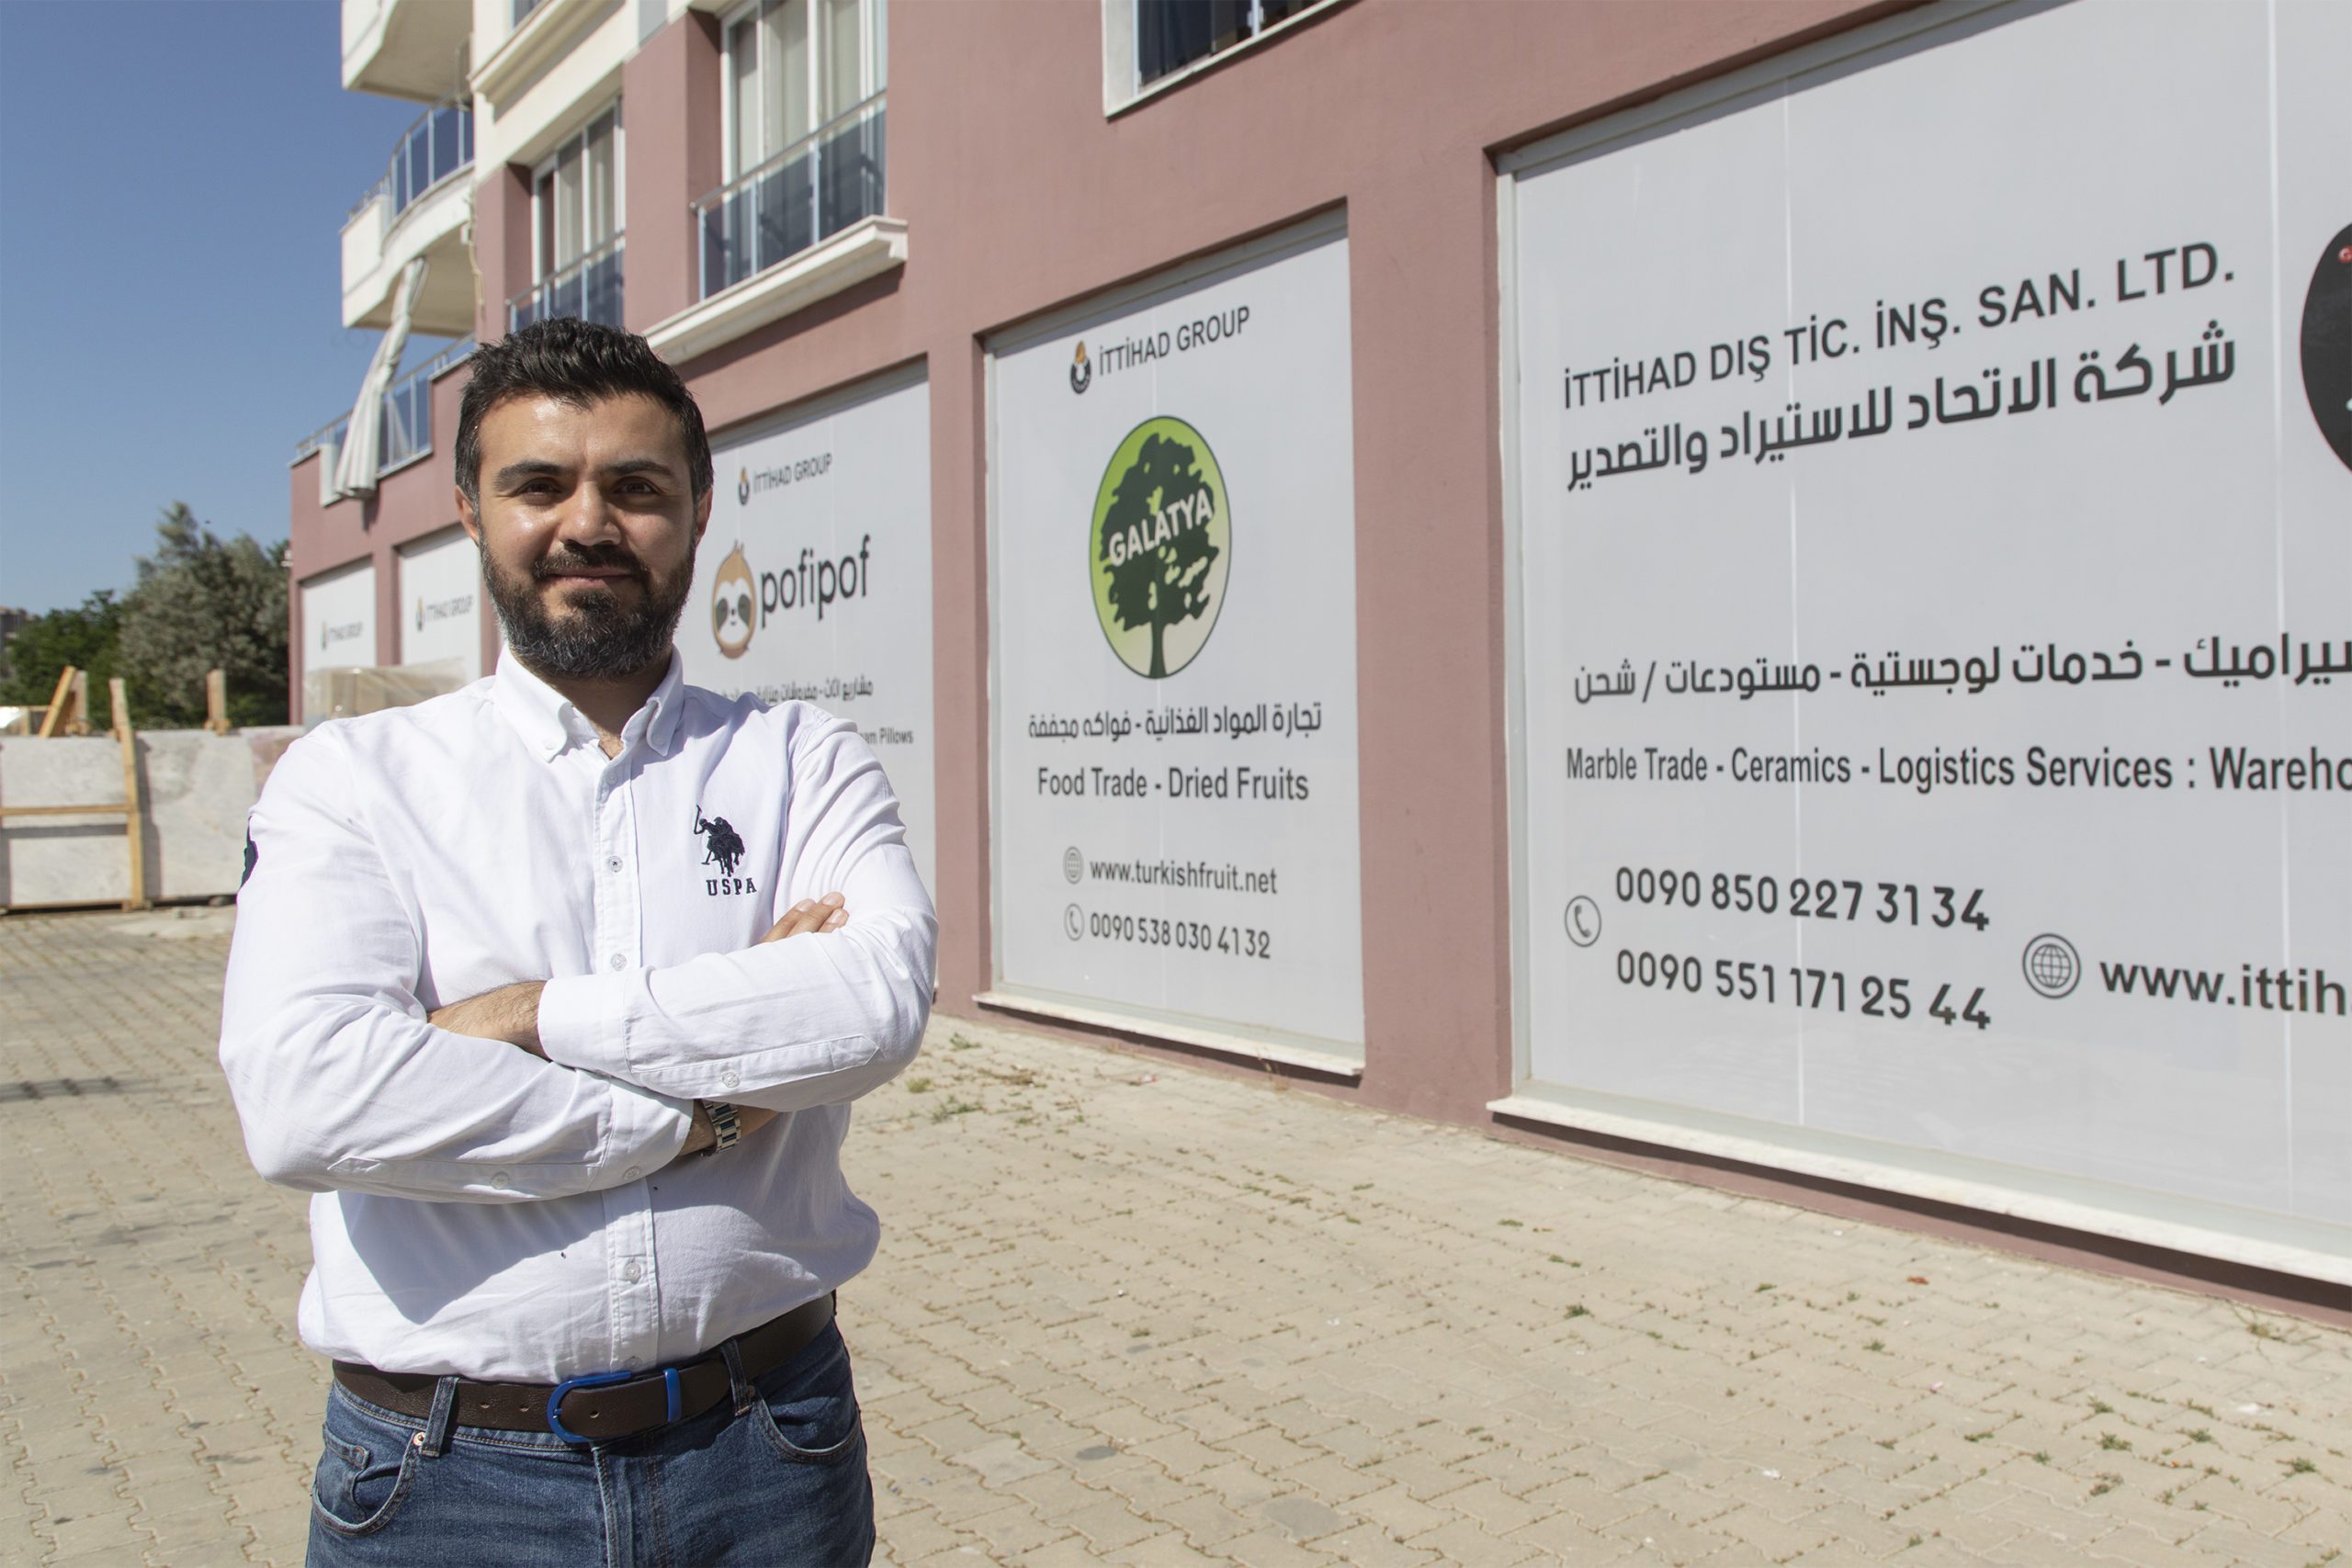 Building a Future in Izmir: Syrian Entrepreneur Overcomes Obstacles and Achieves Success